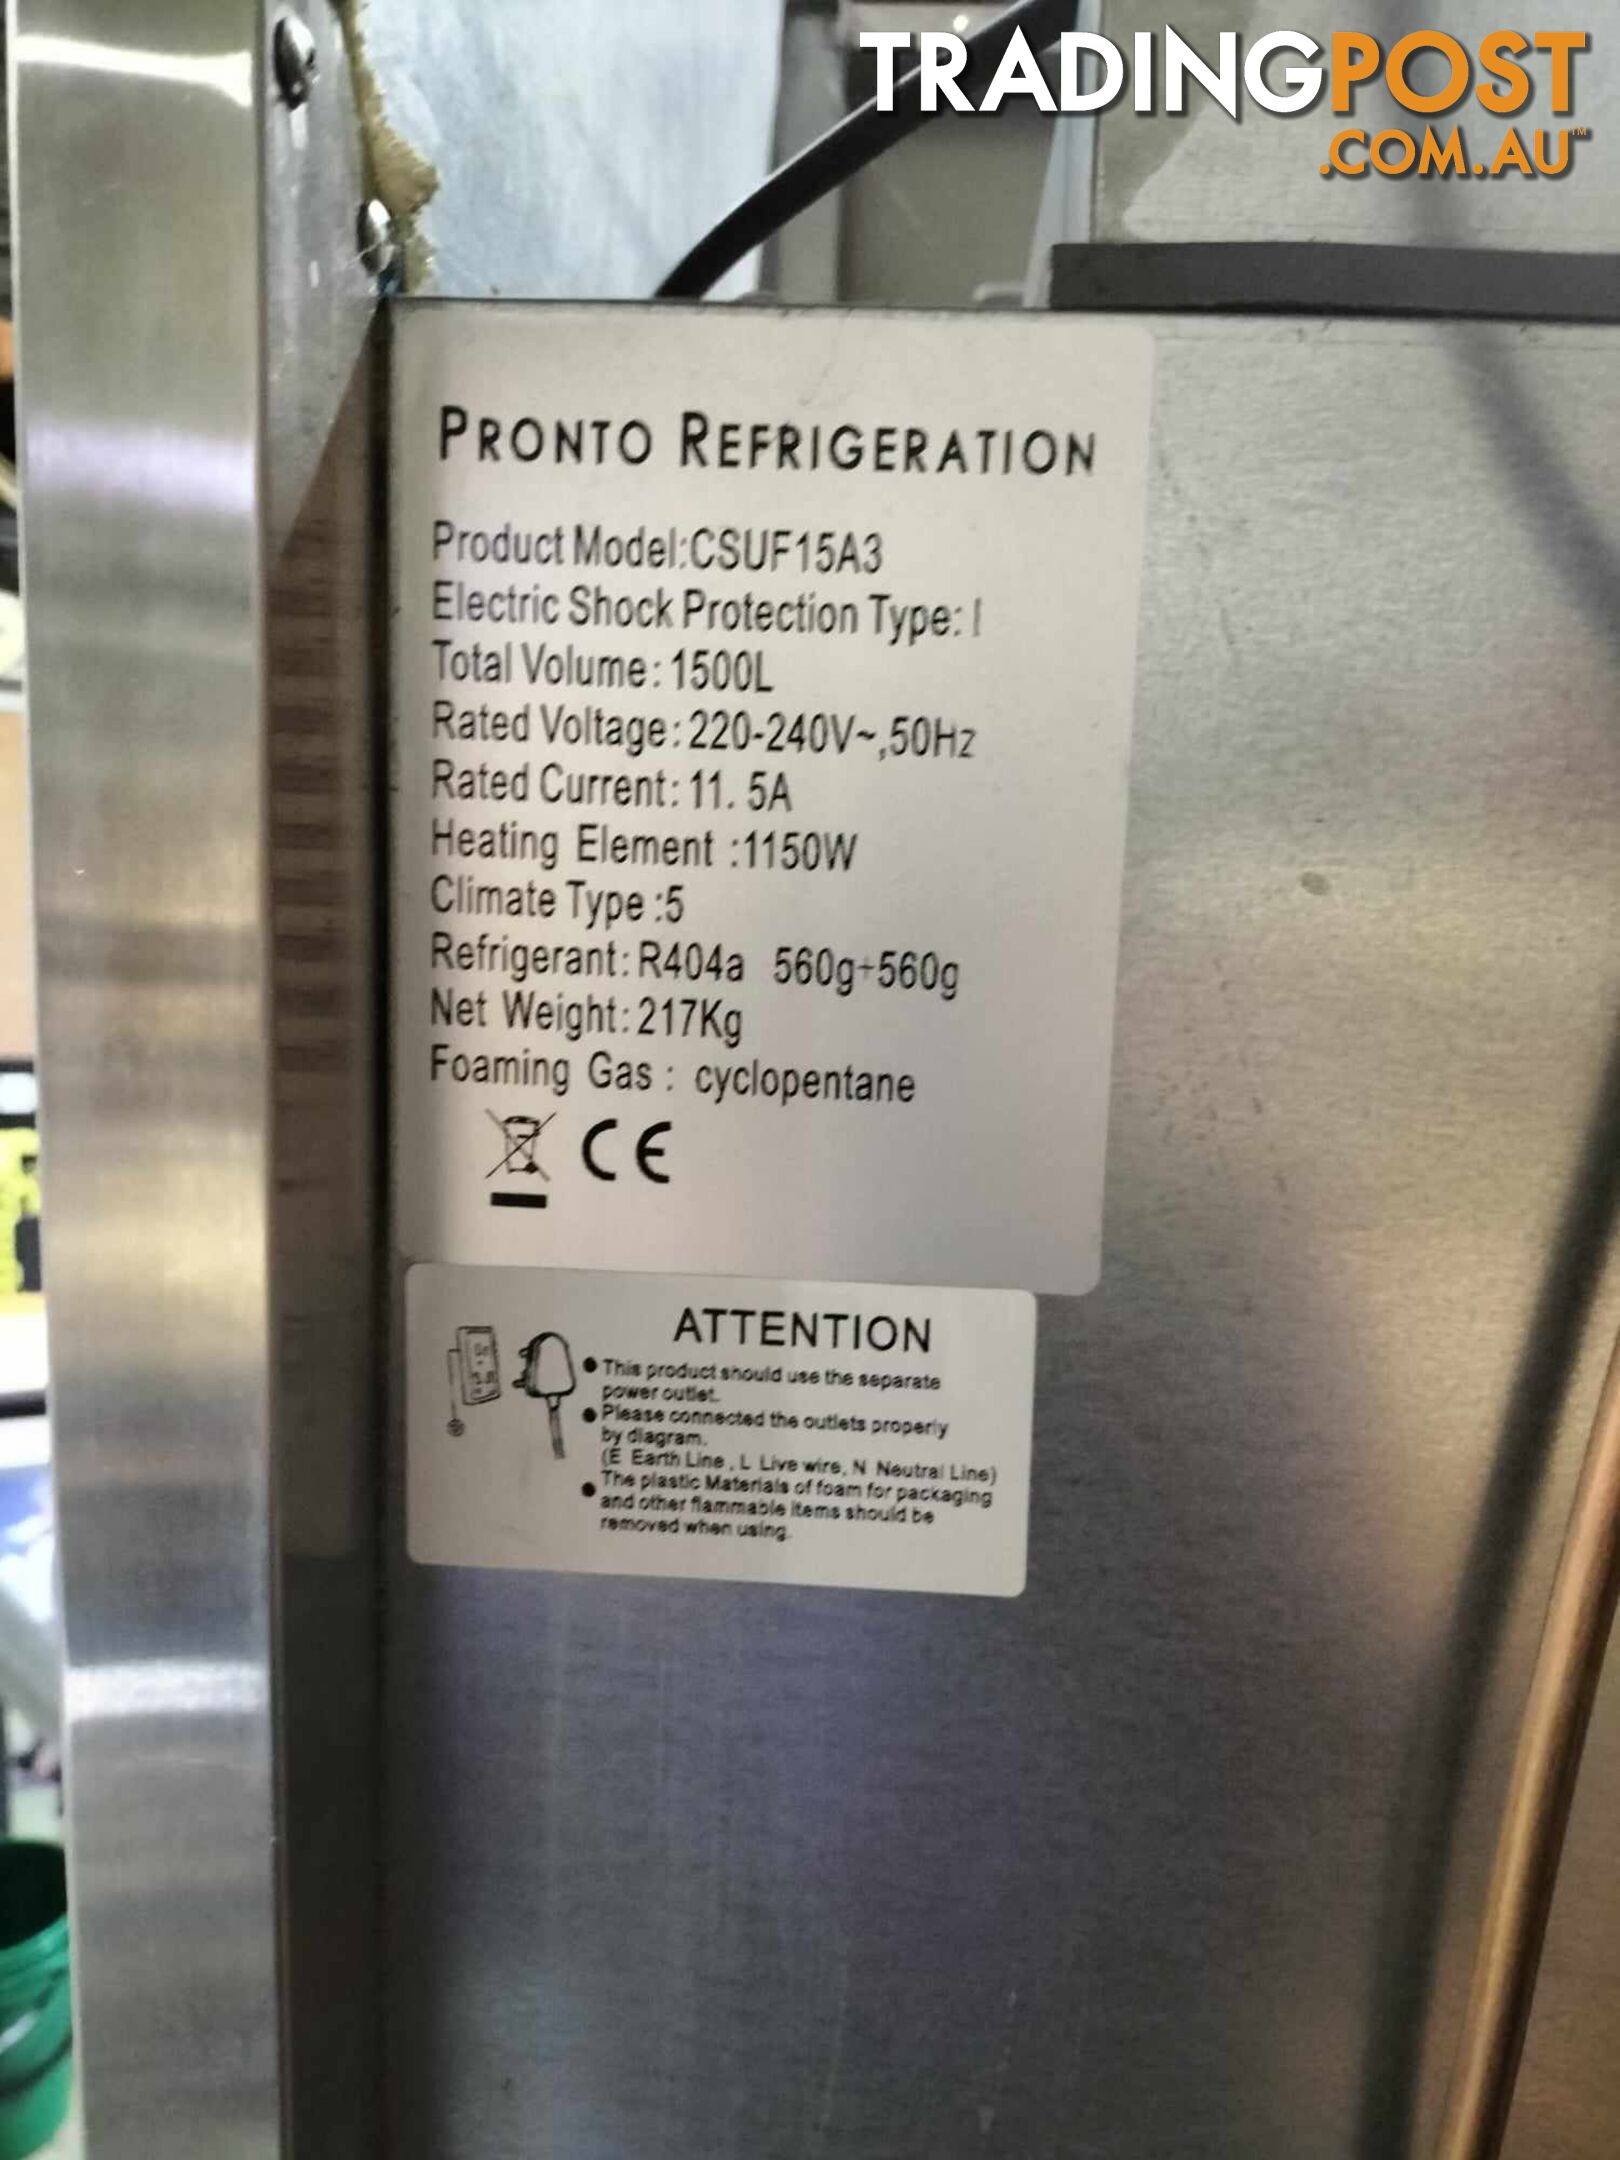 "PRICED 2 SELL TODAY!!!" BARGAIN Pronto Stainless Steel 1500 LITRE Commercial Refrigerator